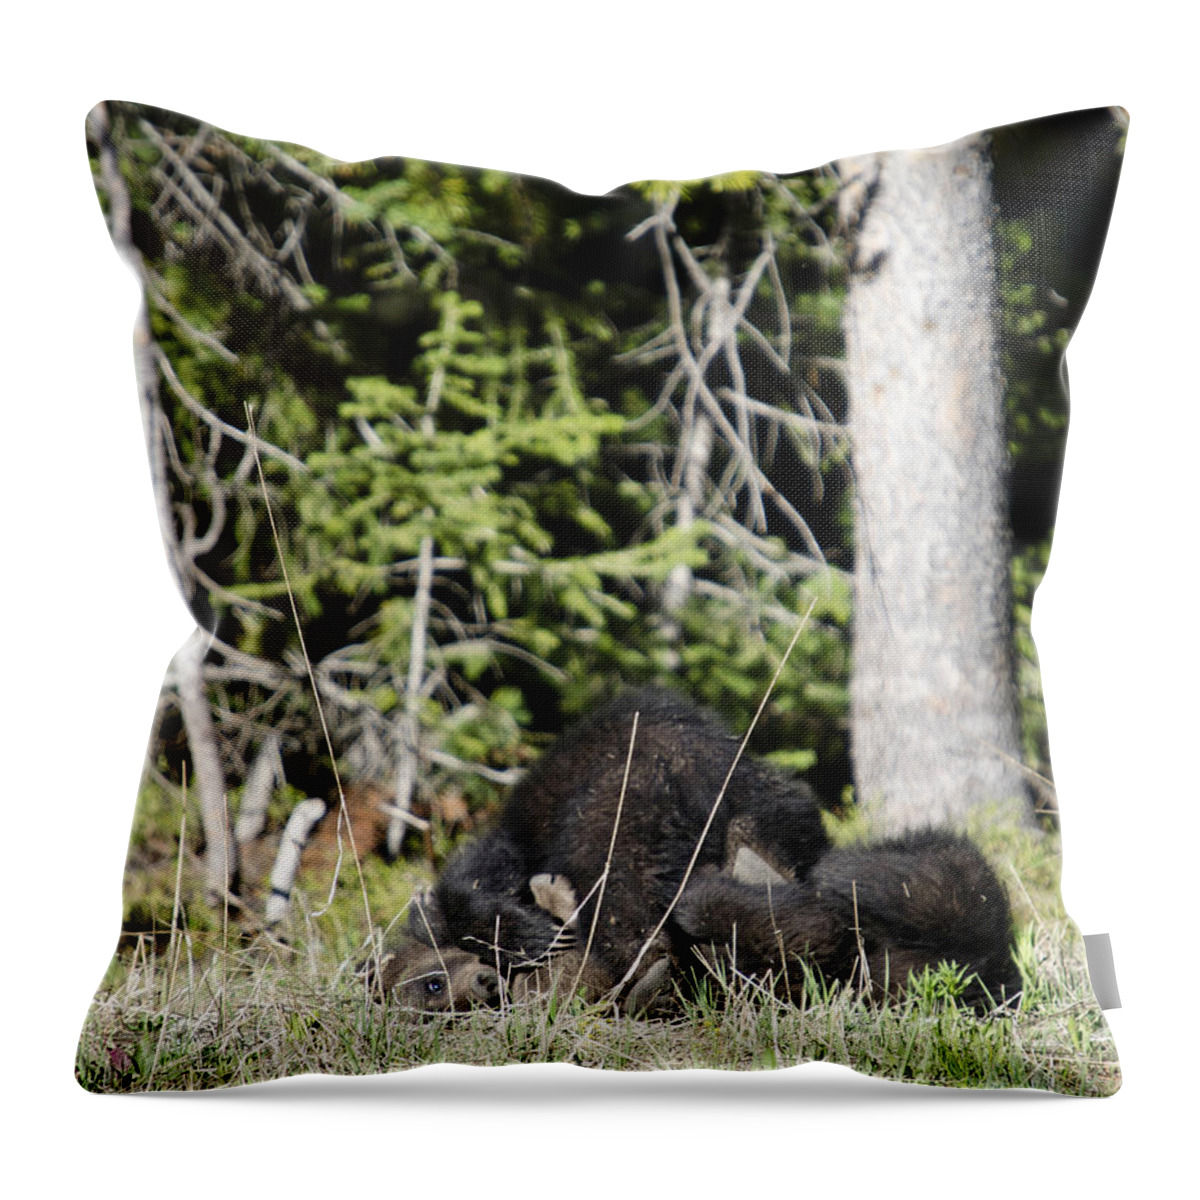 Grand Teton National Park Throw Pillow featuring the photograph Grizzly Cubs Playing by Crystal Wightman